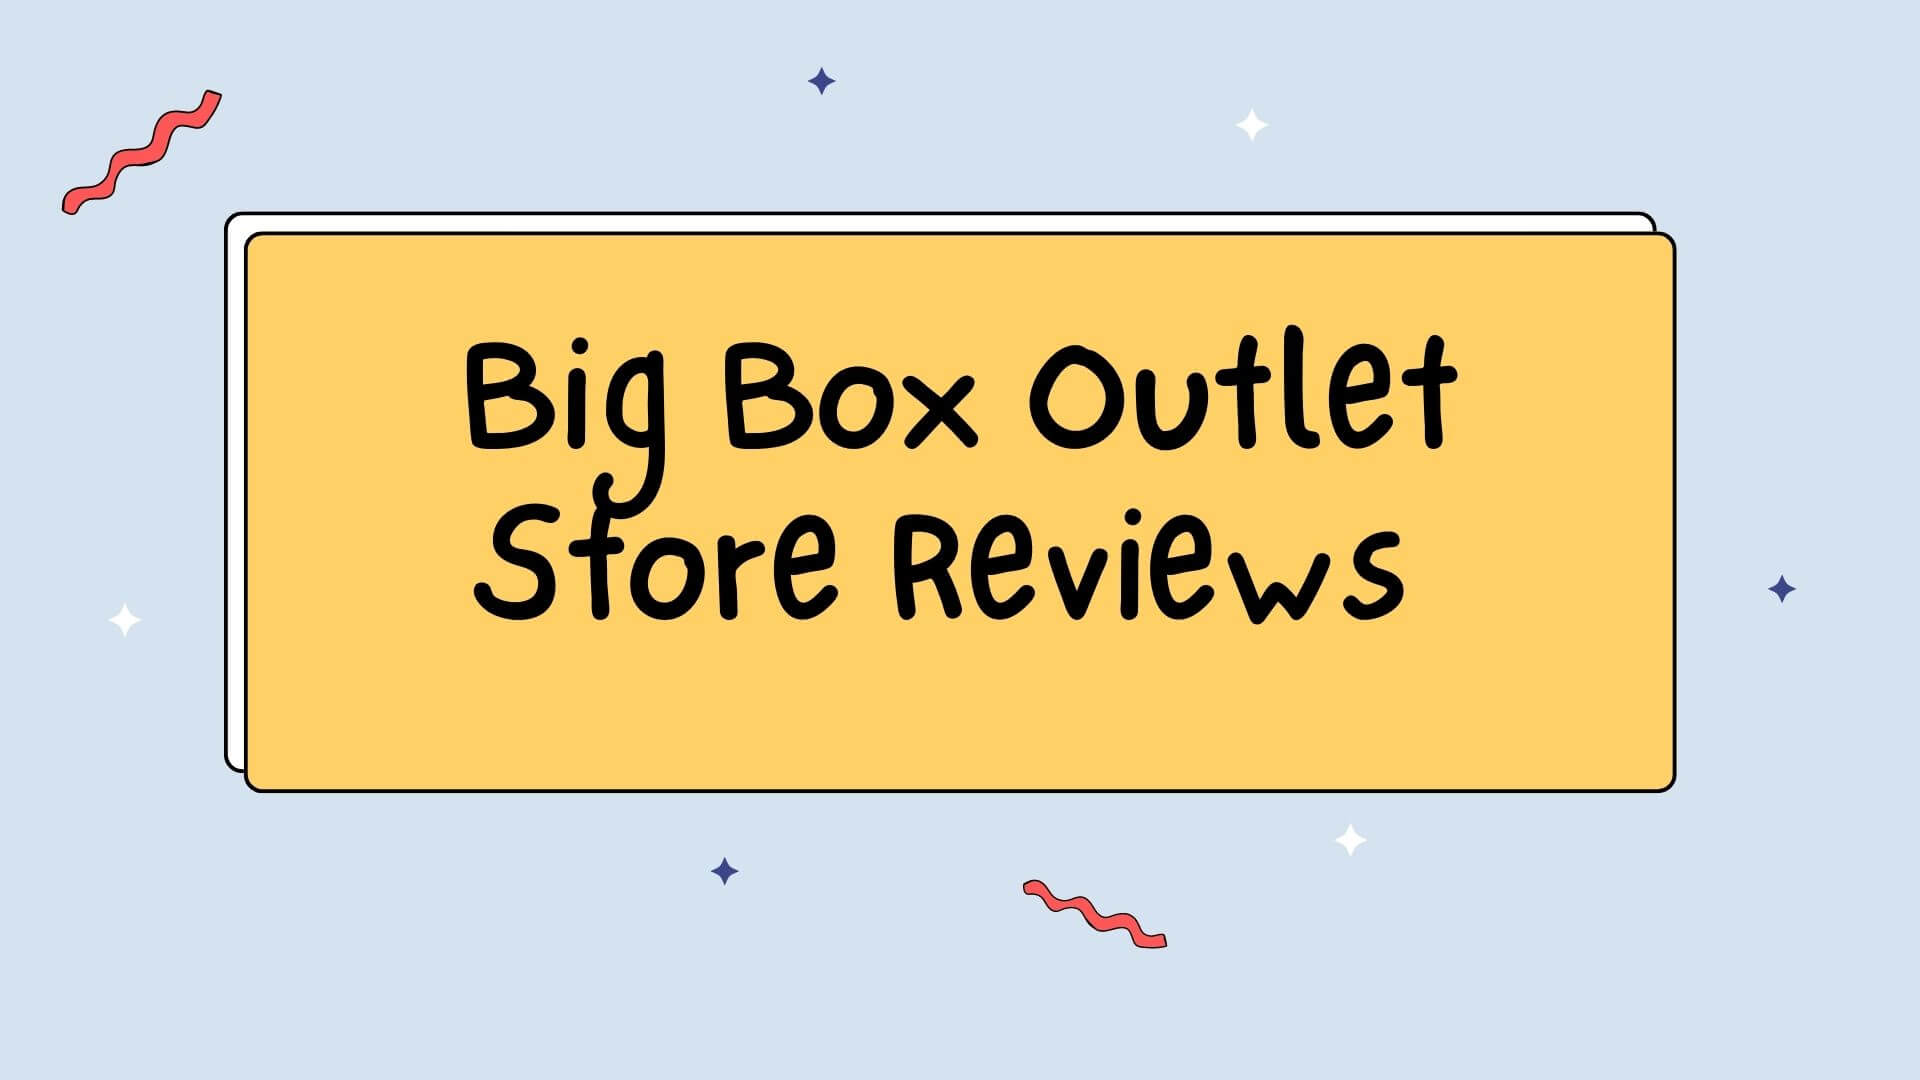 Big Box Outlet Store Reviews